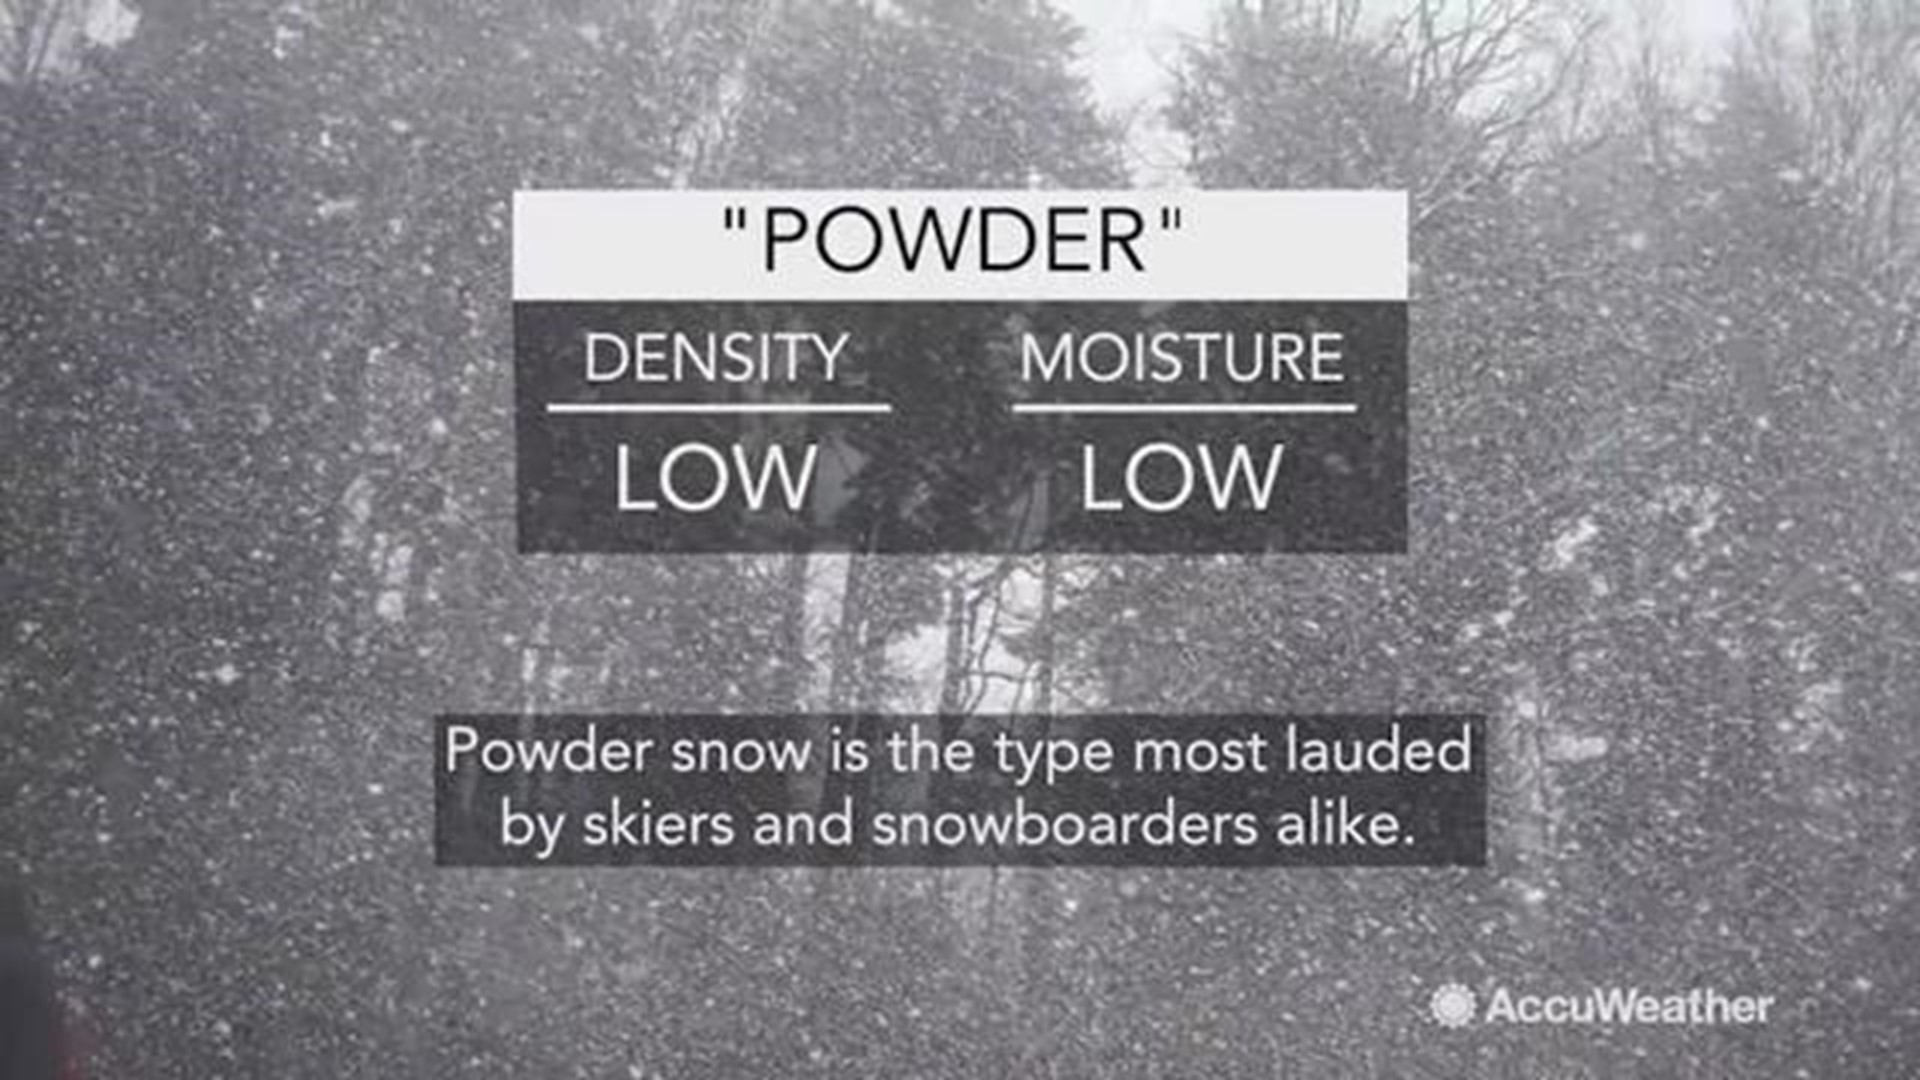 They all differ depending on density and moisture of the snow!